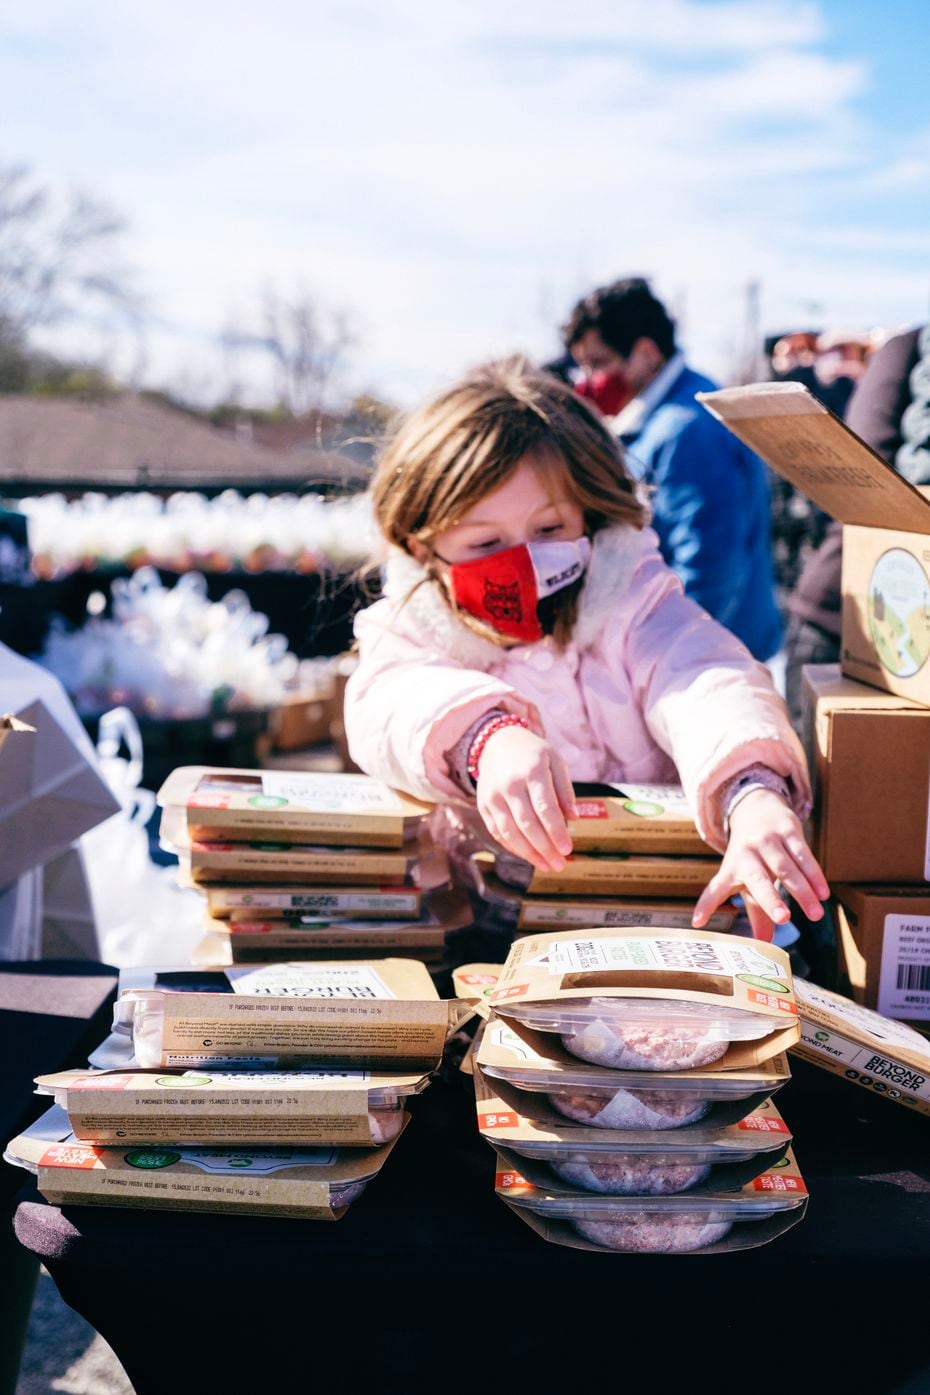 A child wearing a mask and pink coat reaches for a box of food as part of Goodr's pop-up...